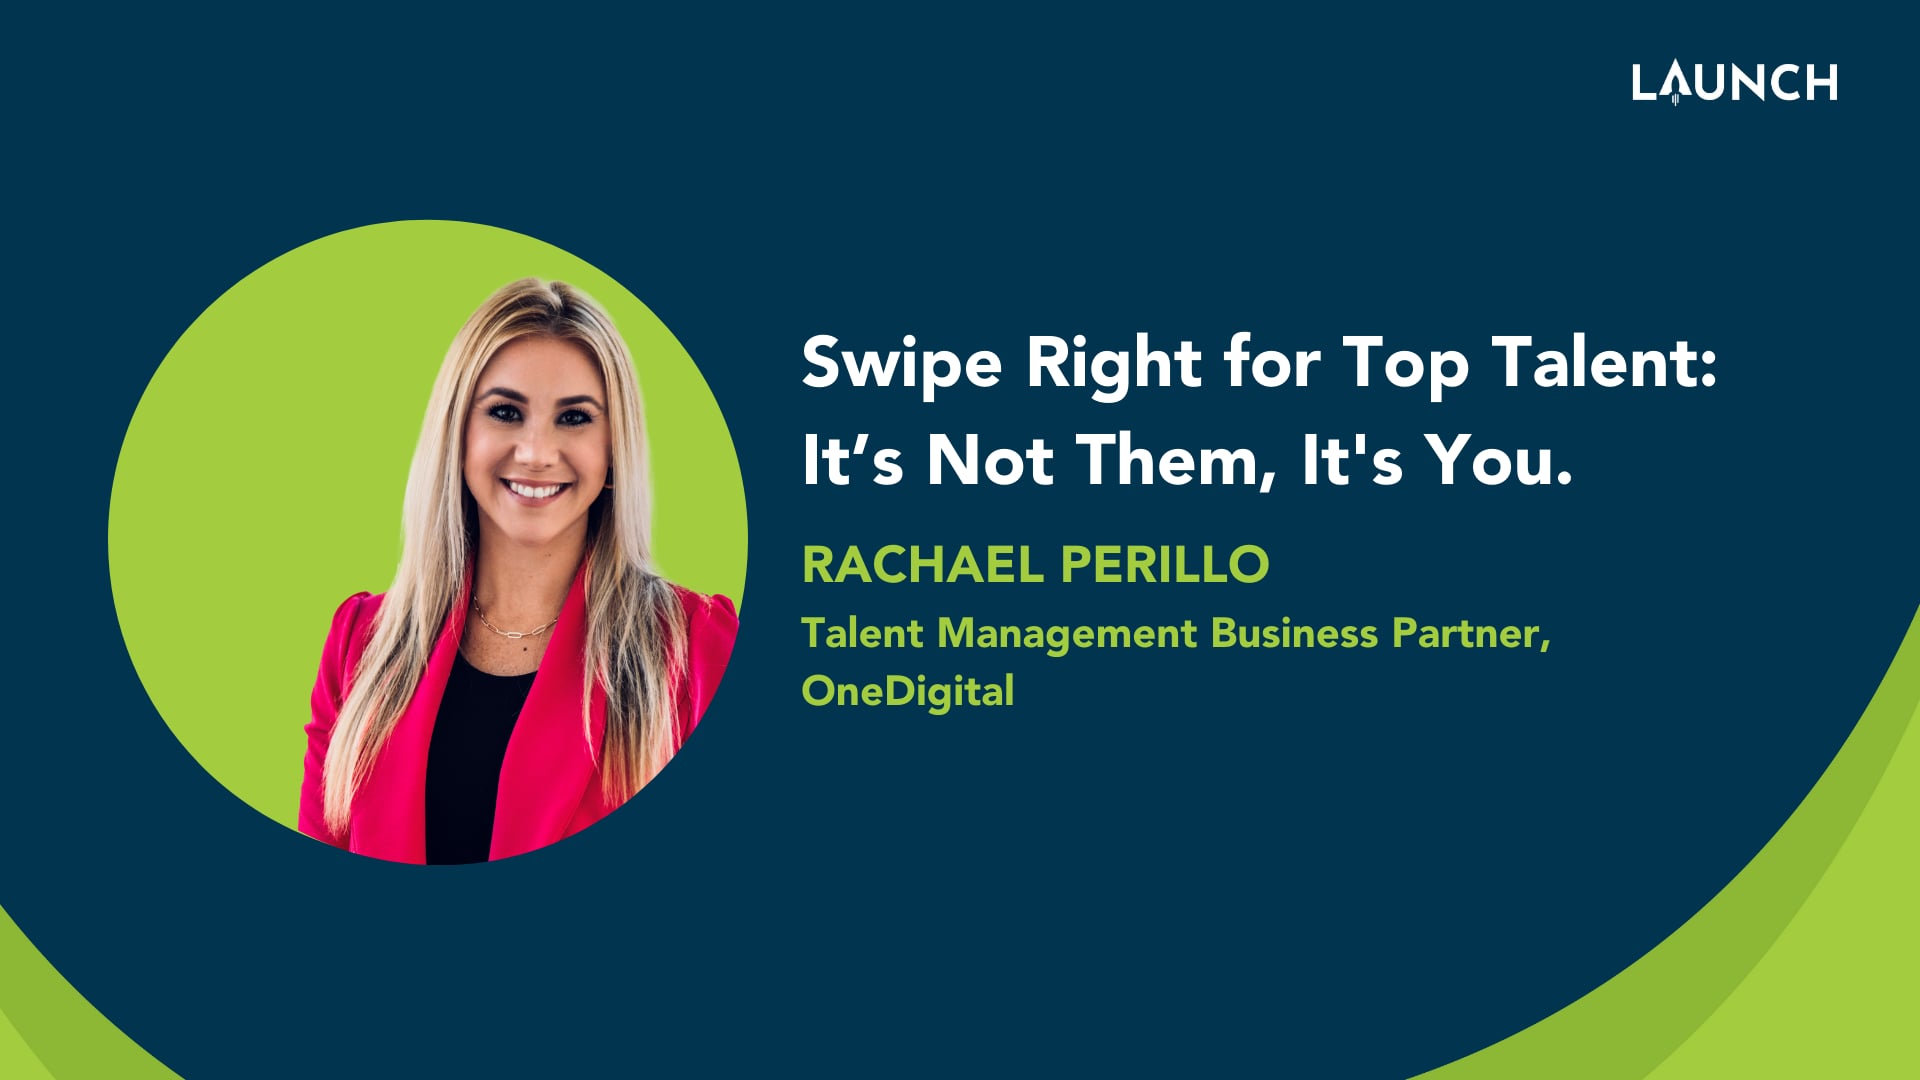 Swipe Right for Top Talent: It's Not Them, It's You - Rachael Perillo